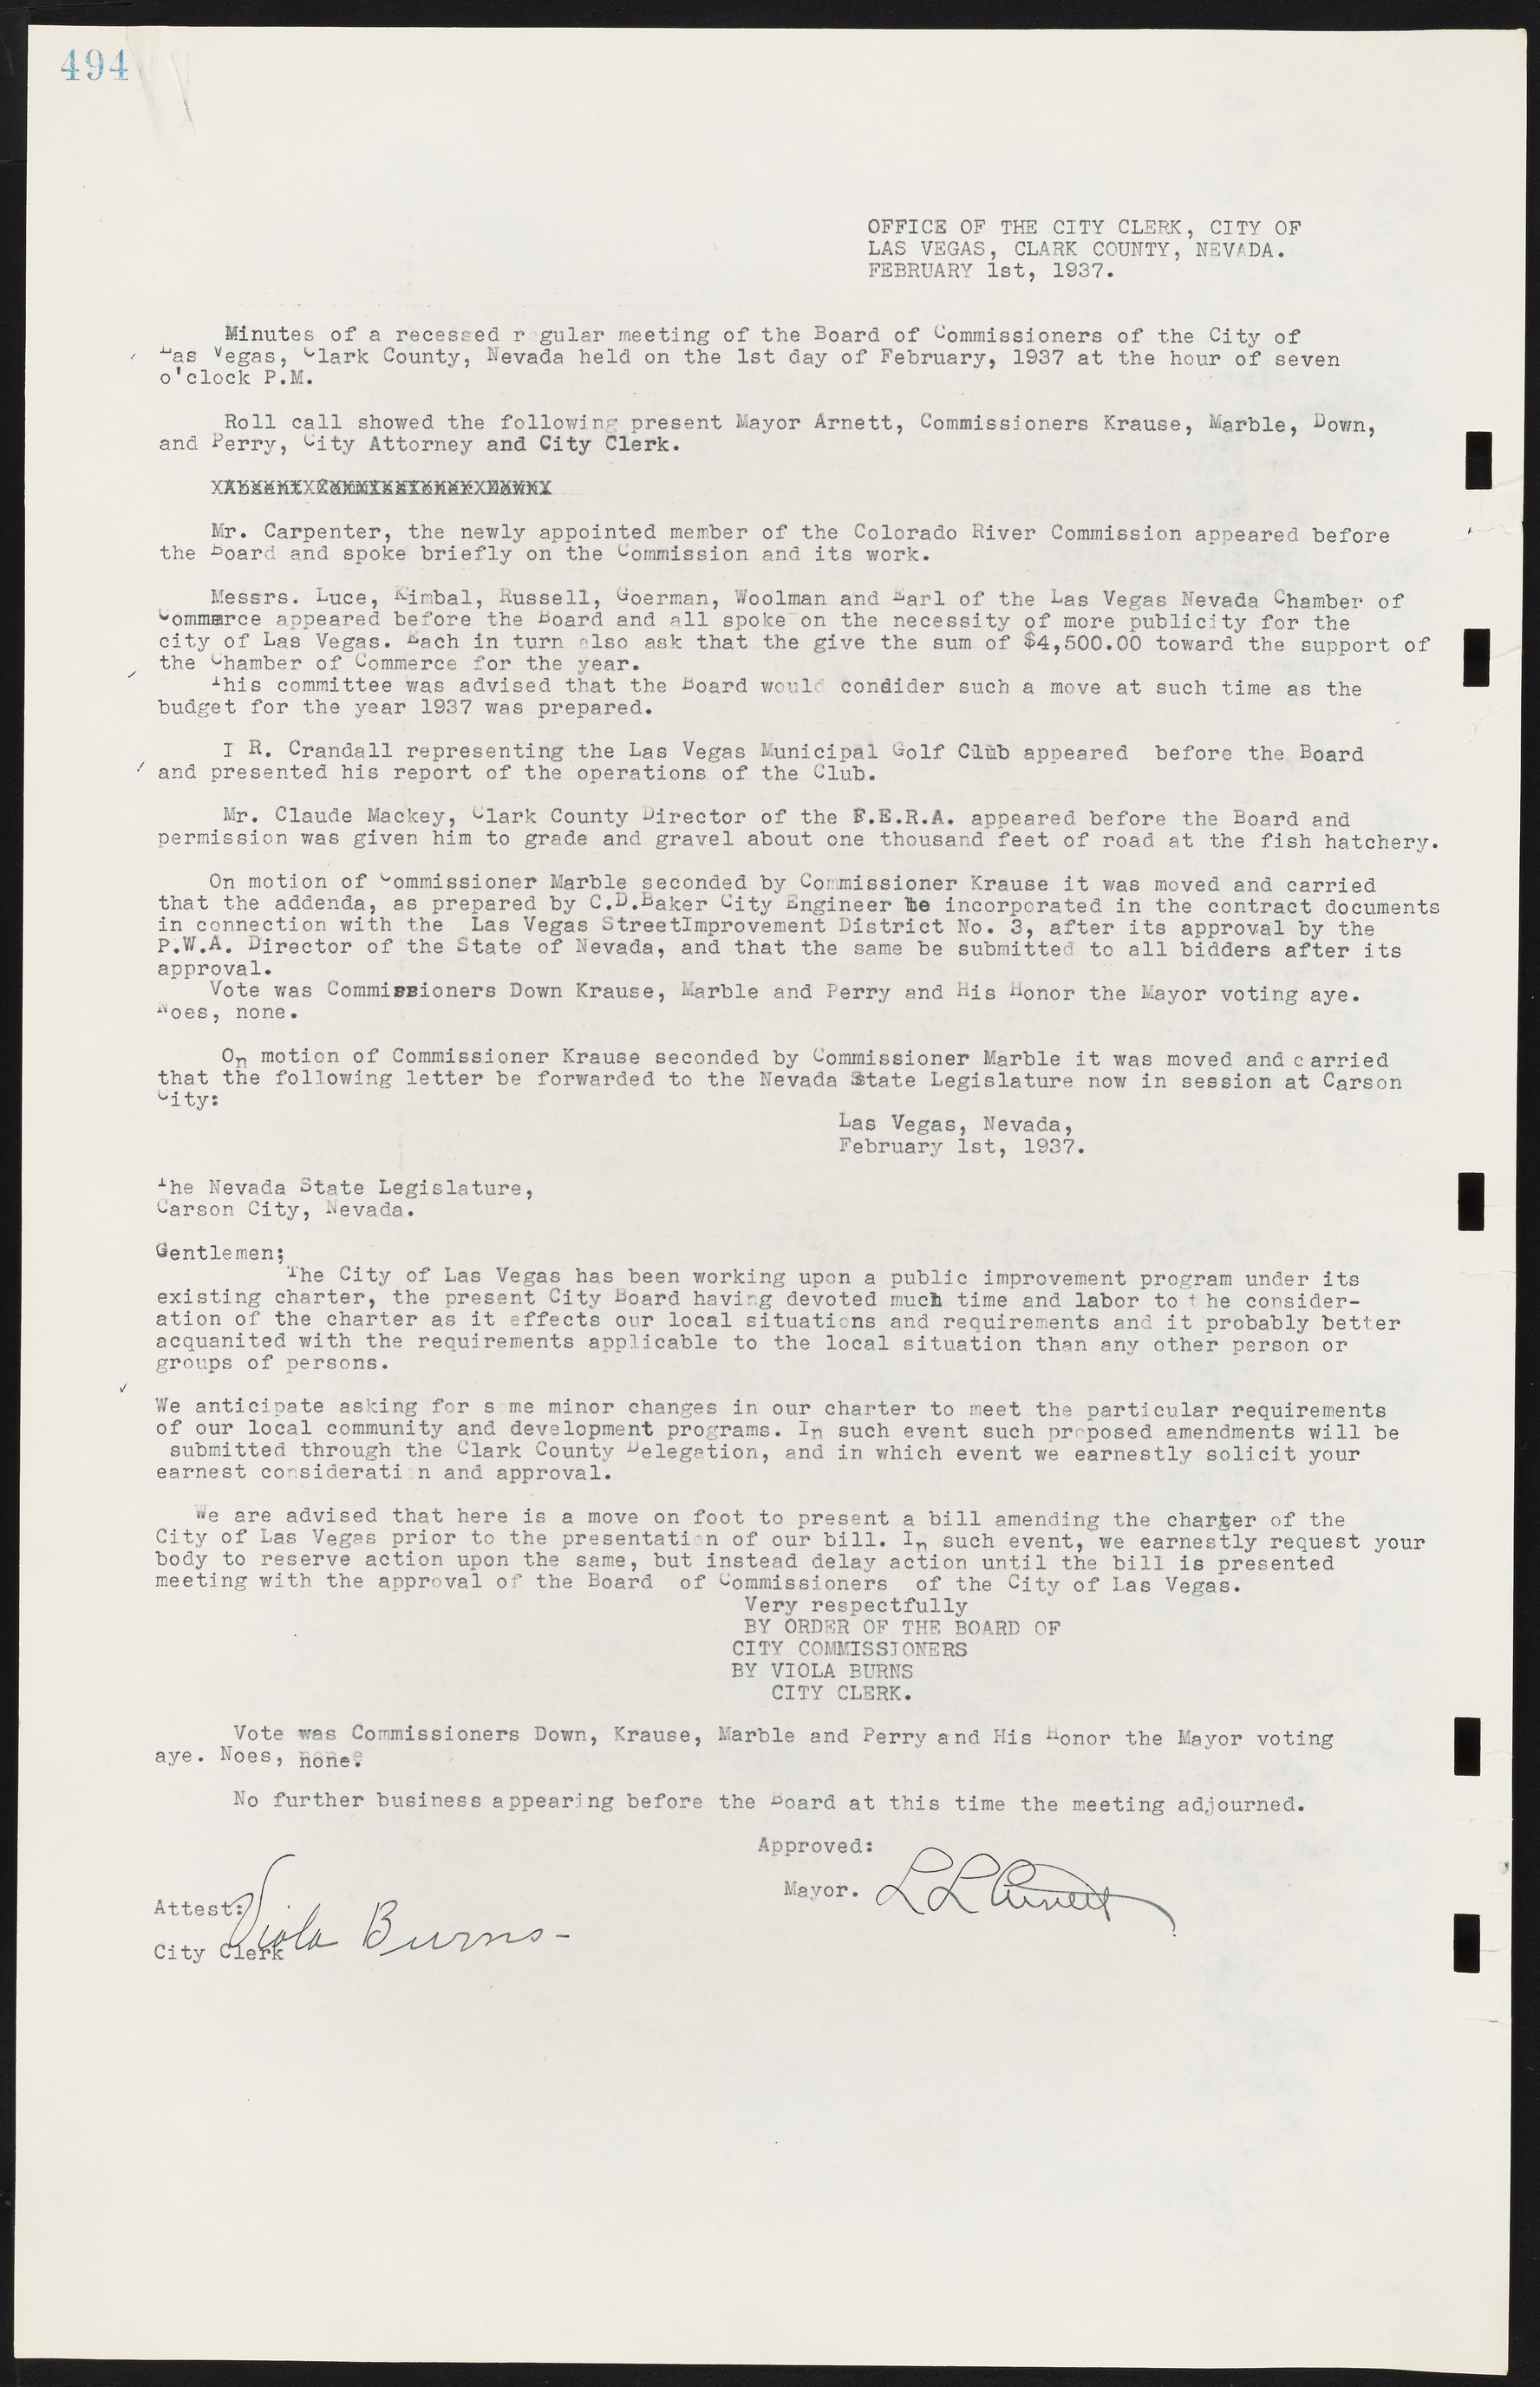 Las Vegas City Commission Minutes, May 14, 1929 to February 11, 1937, lvc000003-501